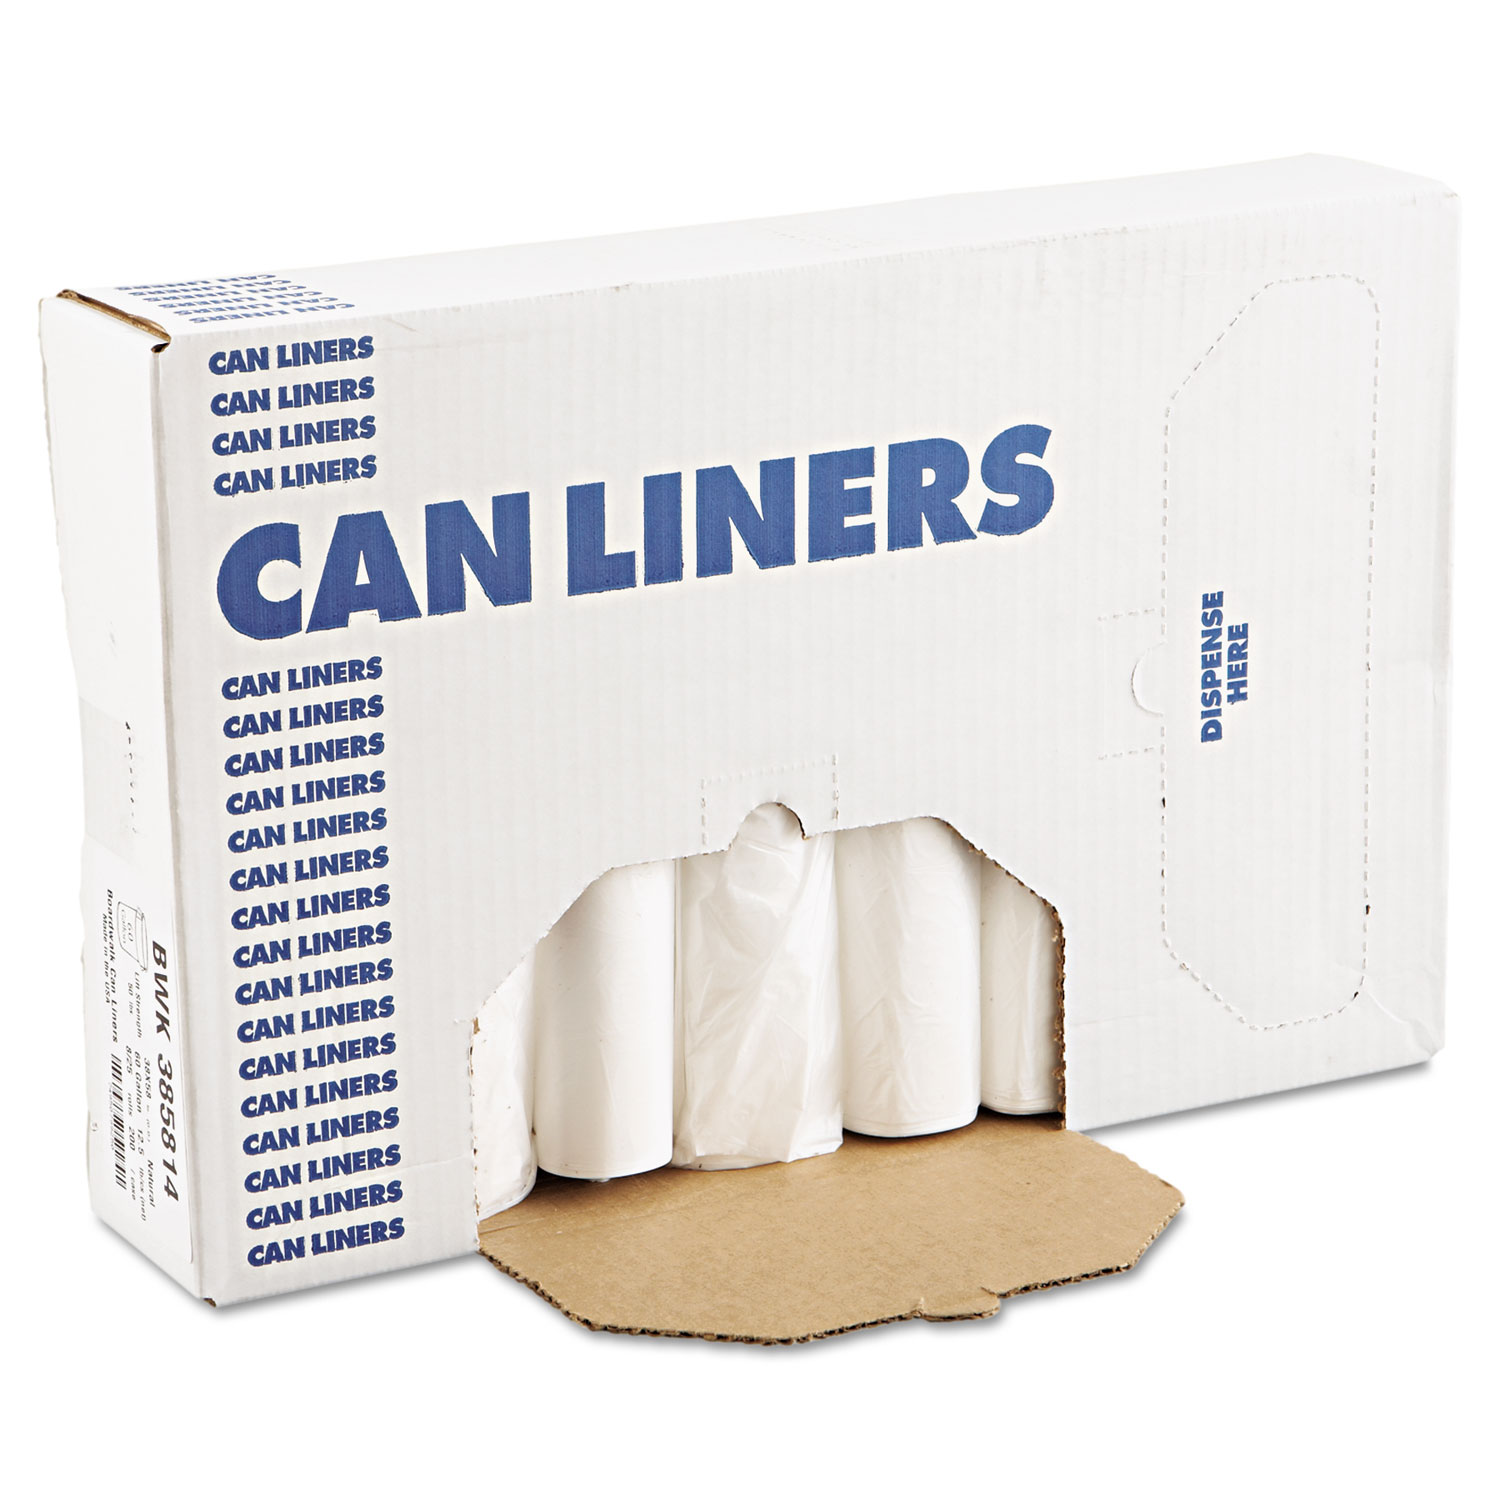  Boardwalk V7658MNKR02 High-Density Can Liners, 60 gal, 11 microns, 38 x 58, Natural, 200/Carton (BWK385814) 